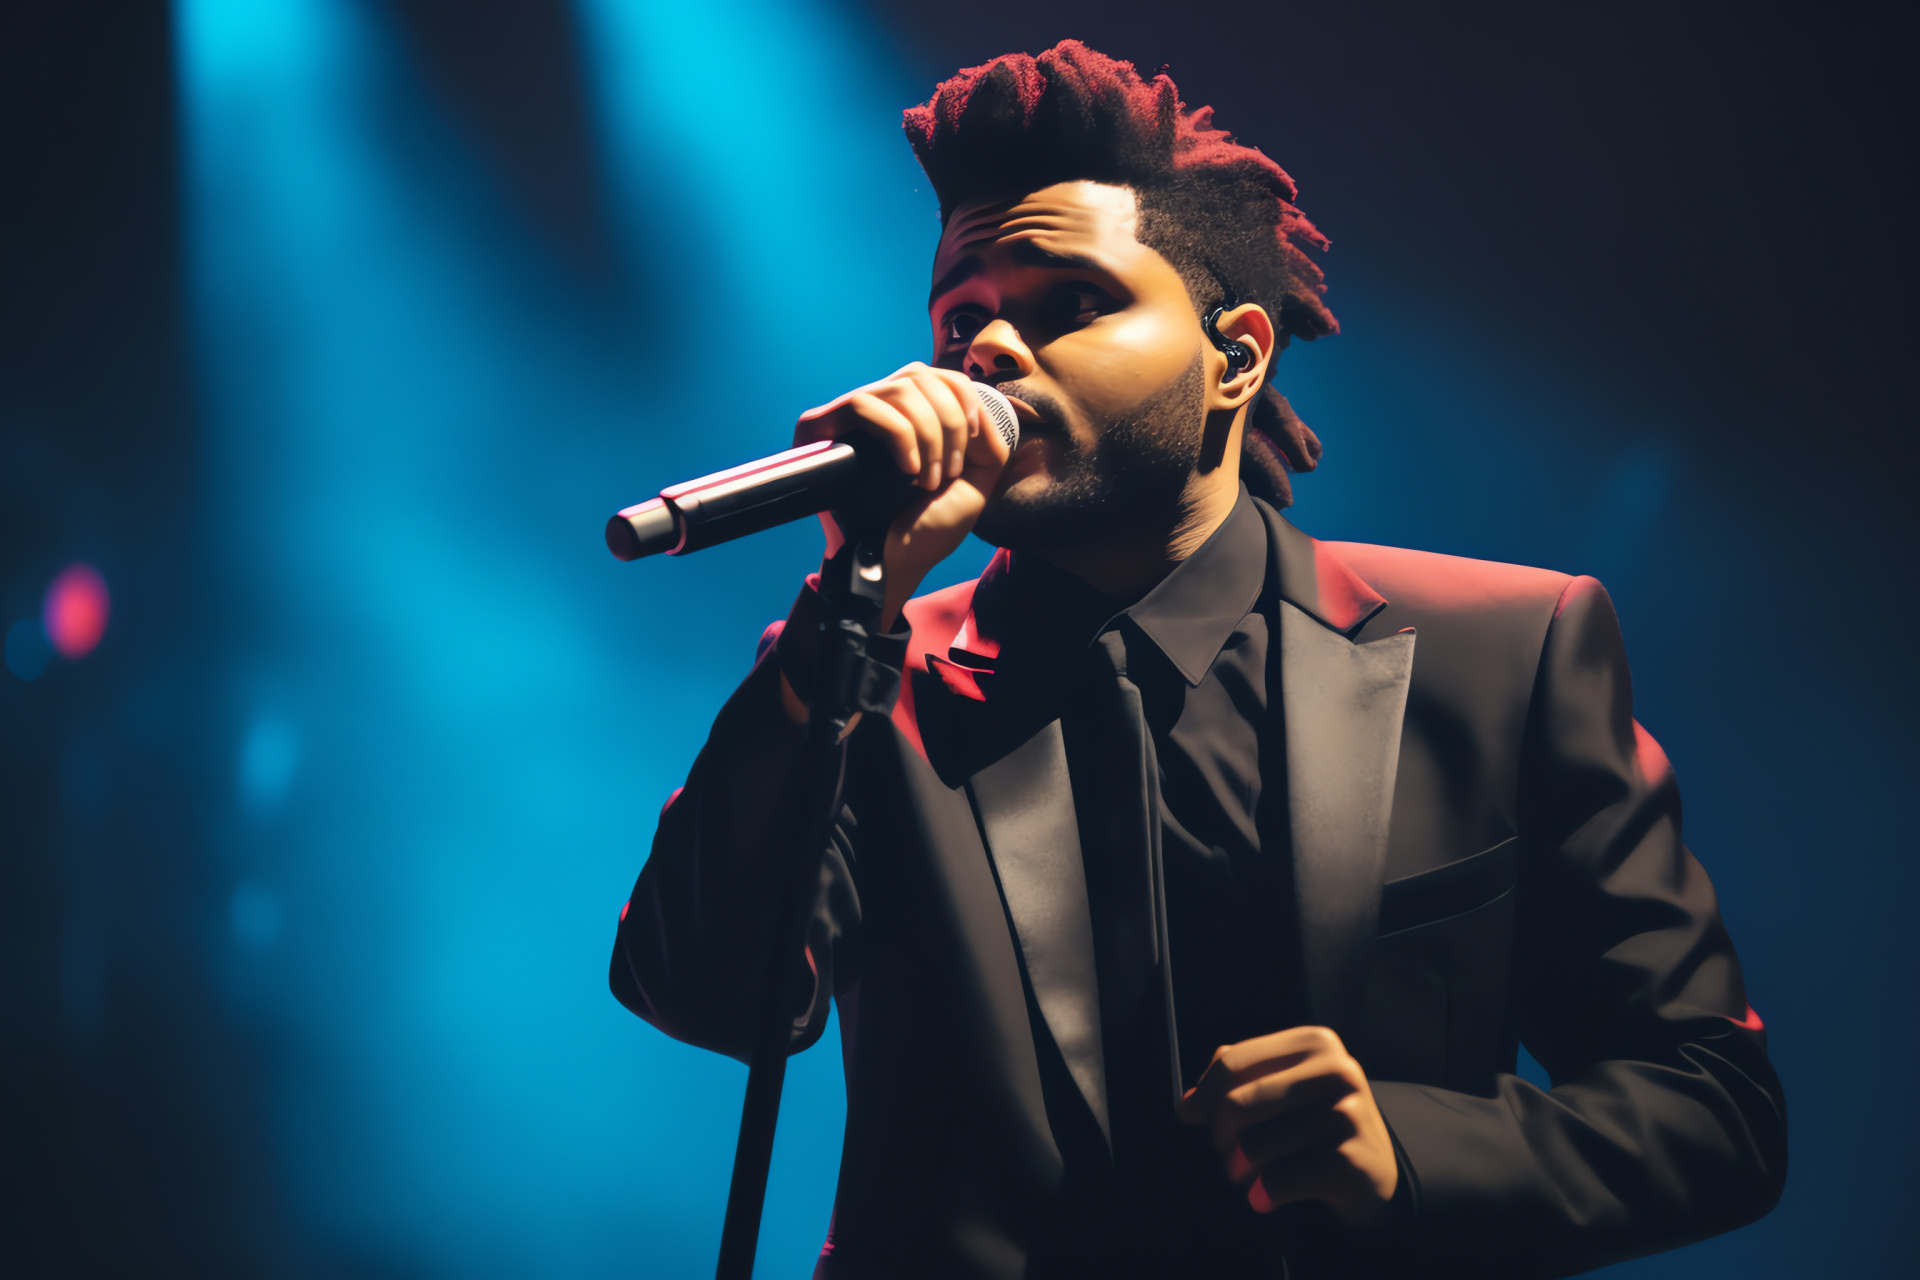 The Weeknd in After Hours, charismatic stage presence, sleek black suit, professional microphone, concert ambiance, HD Desktop Image